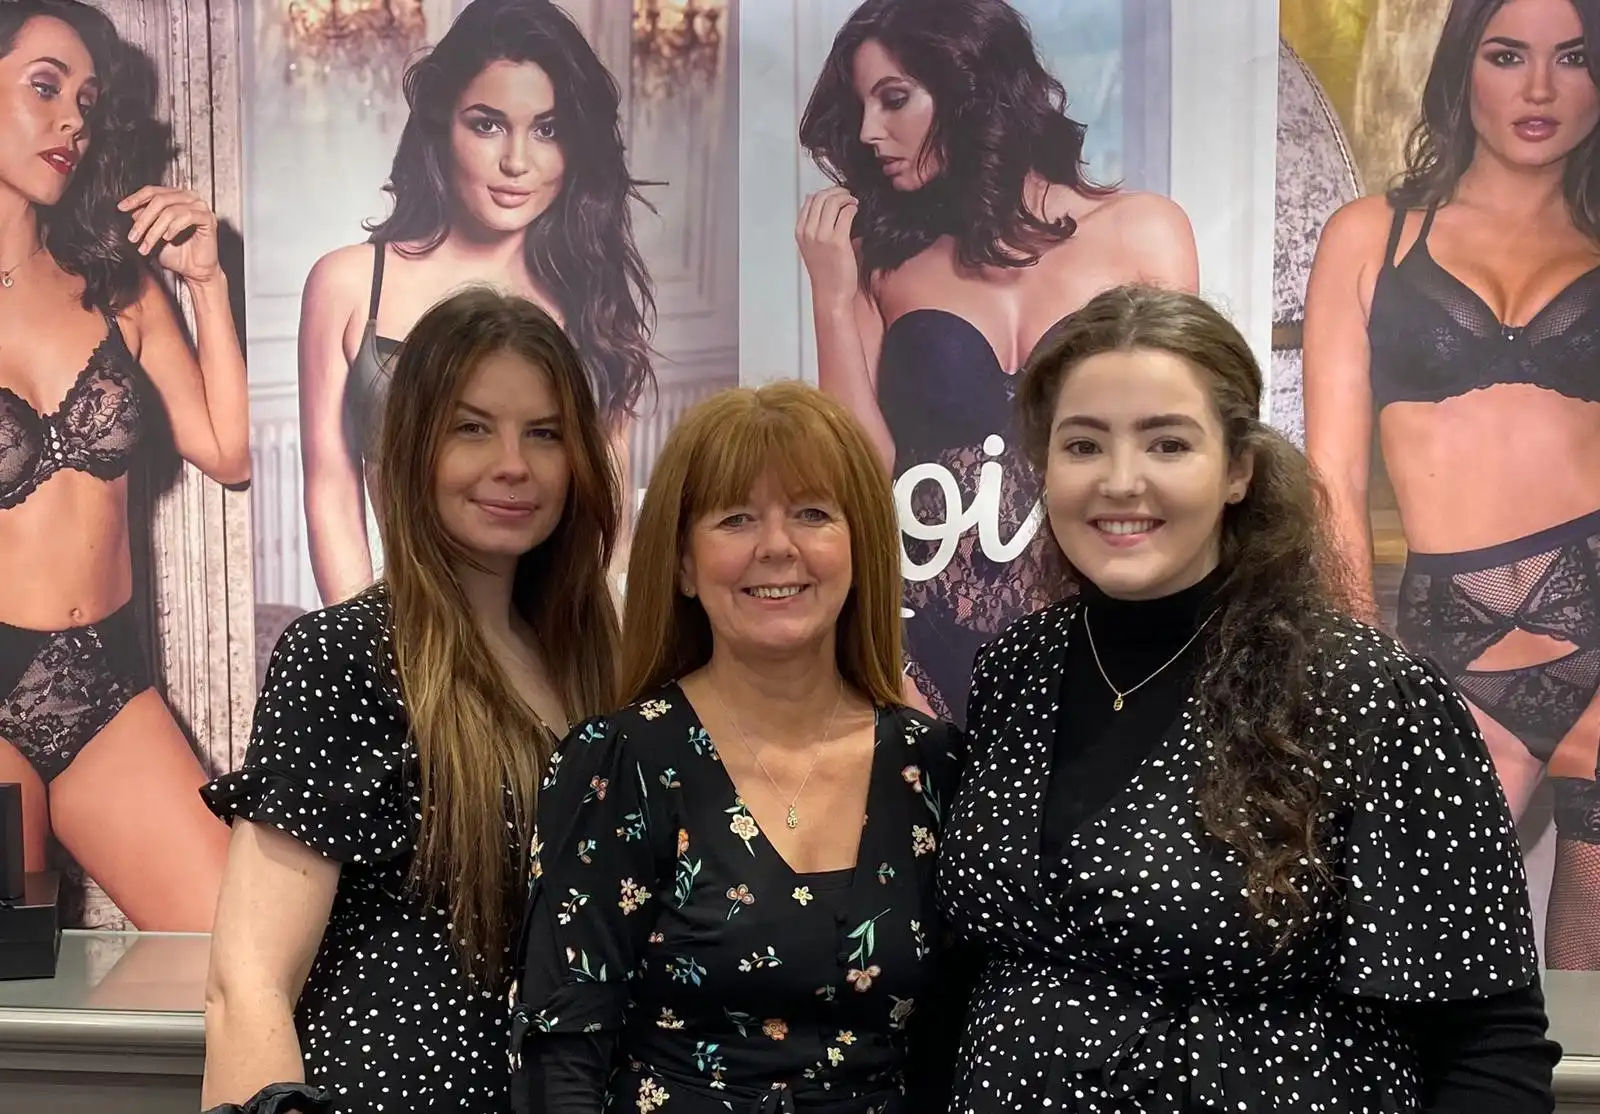 Book a virtual bra fitting  We can't wait to welcome you back into our  shops soon in the meantime why not book a virtual fitting with us?! Our  friendly fitters will